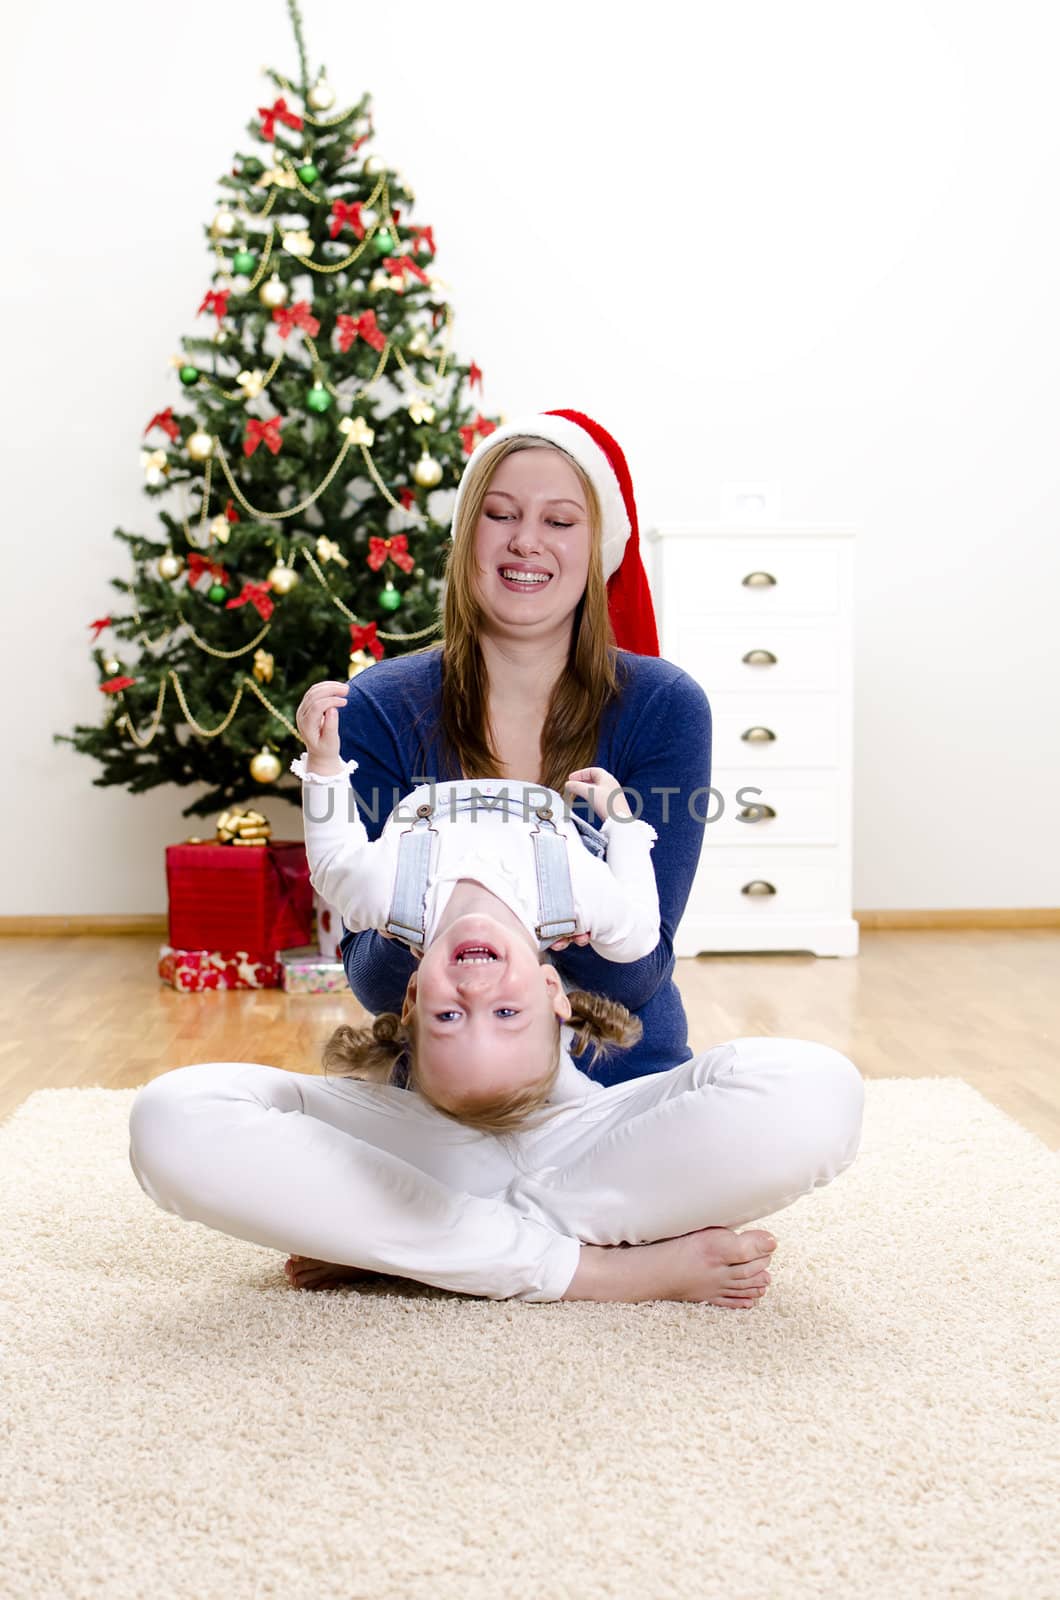 Little girl and her mom having fun at Christmas